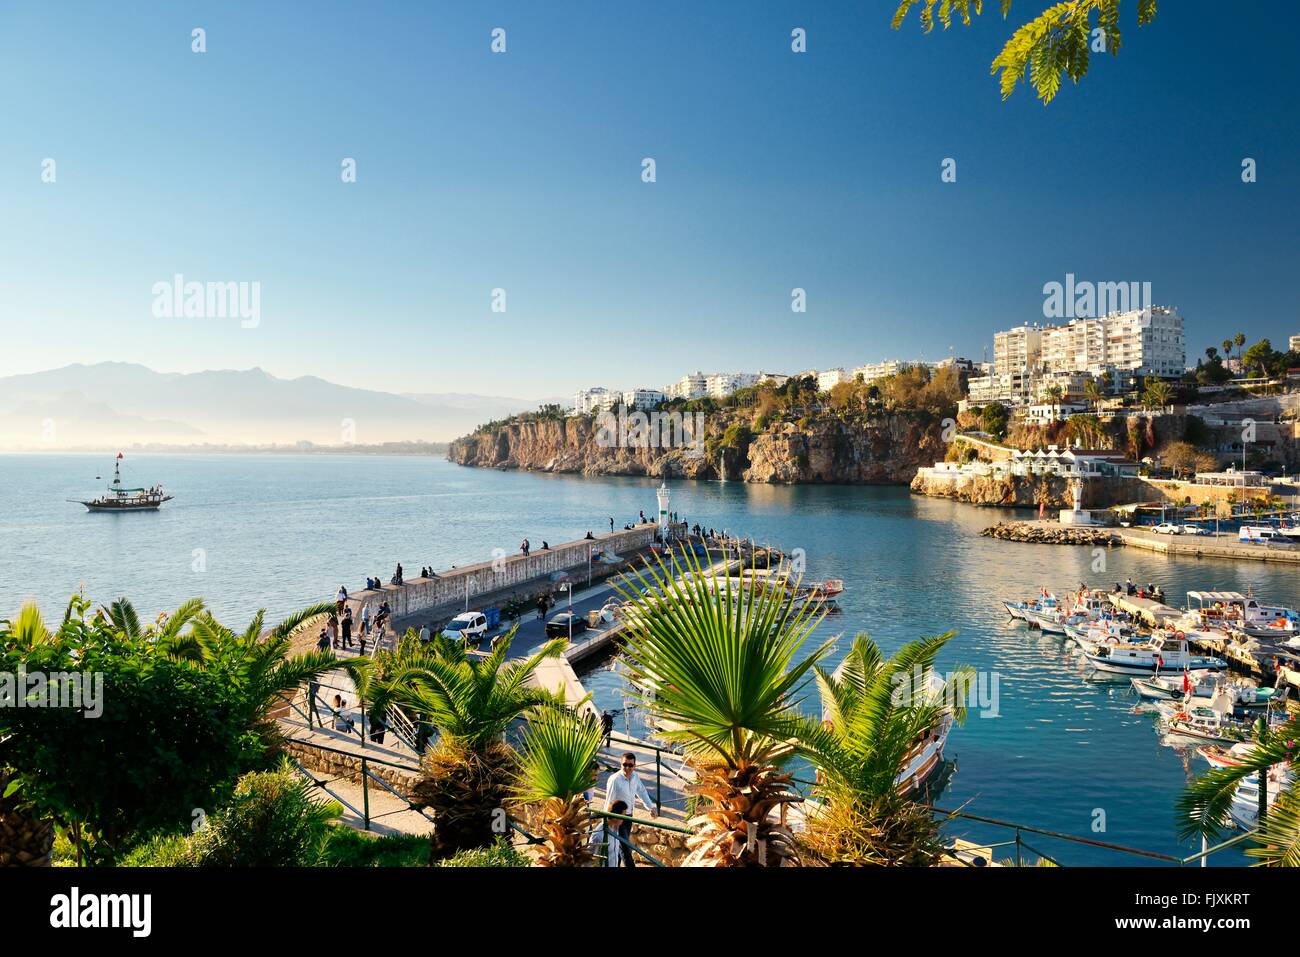 Kaleici is the historic centre of the city of Antalya, Turkey. NW over the old harbour and marina on the Mediterranean coast Stock Photo